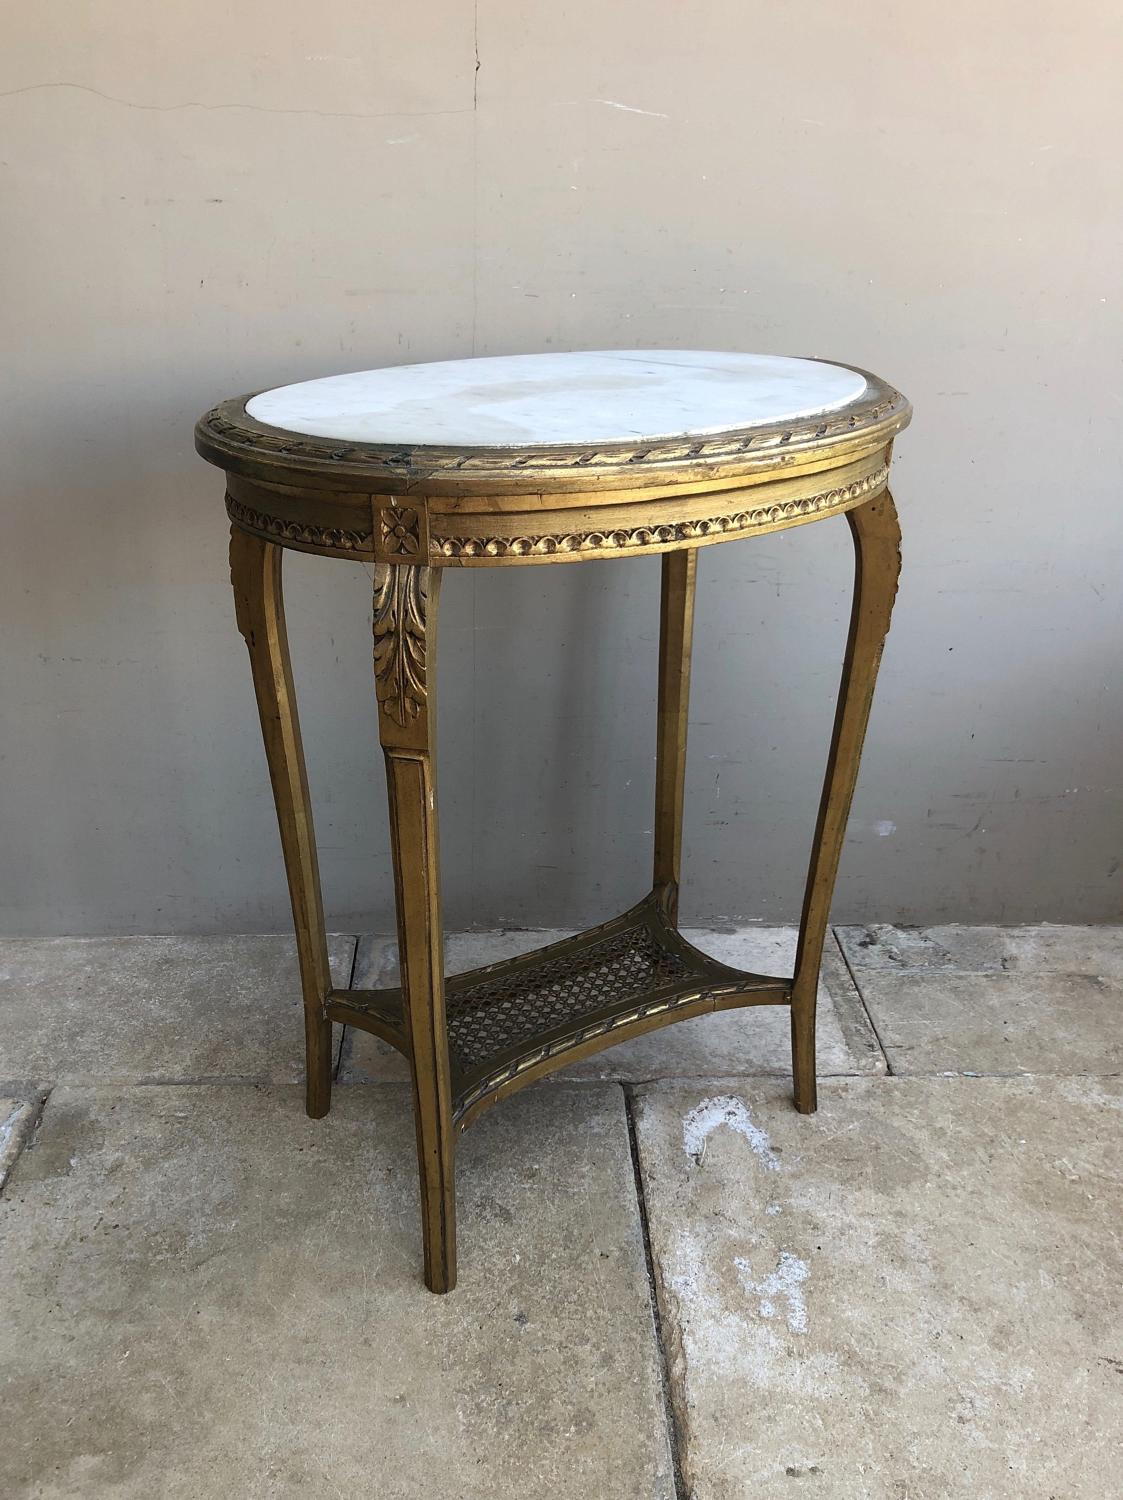 Early 20th Century Giltwood Side Table with White Marble Top